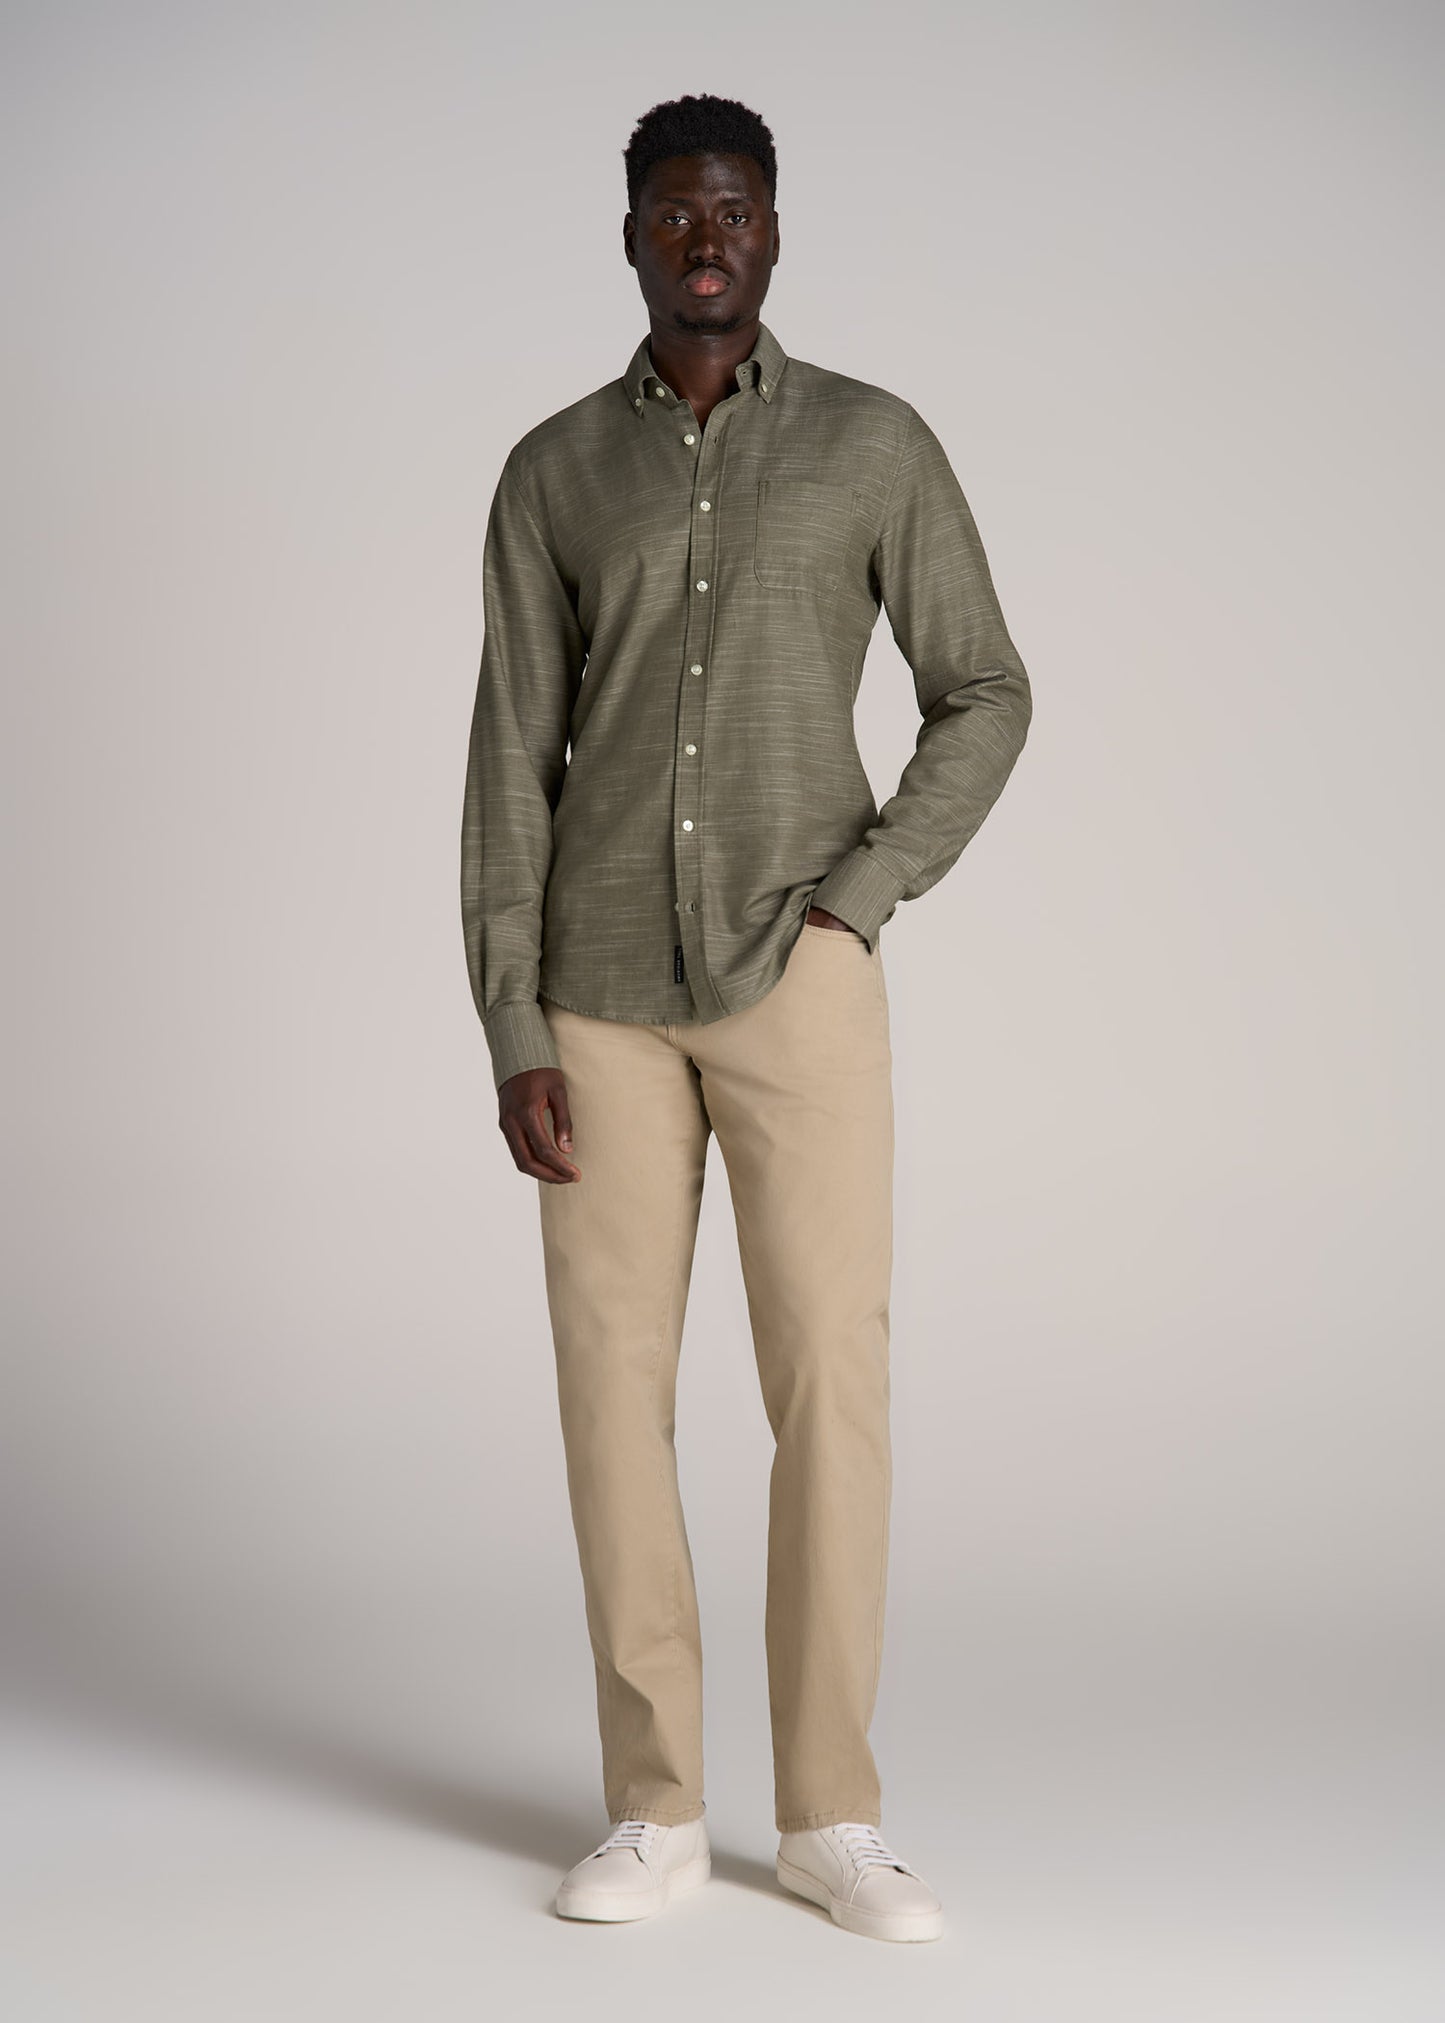 Textured Weave Cotton Button-Up Shirt for Tall Men in Olive